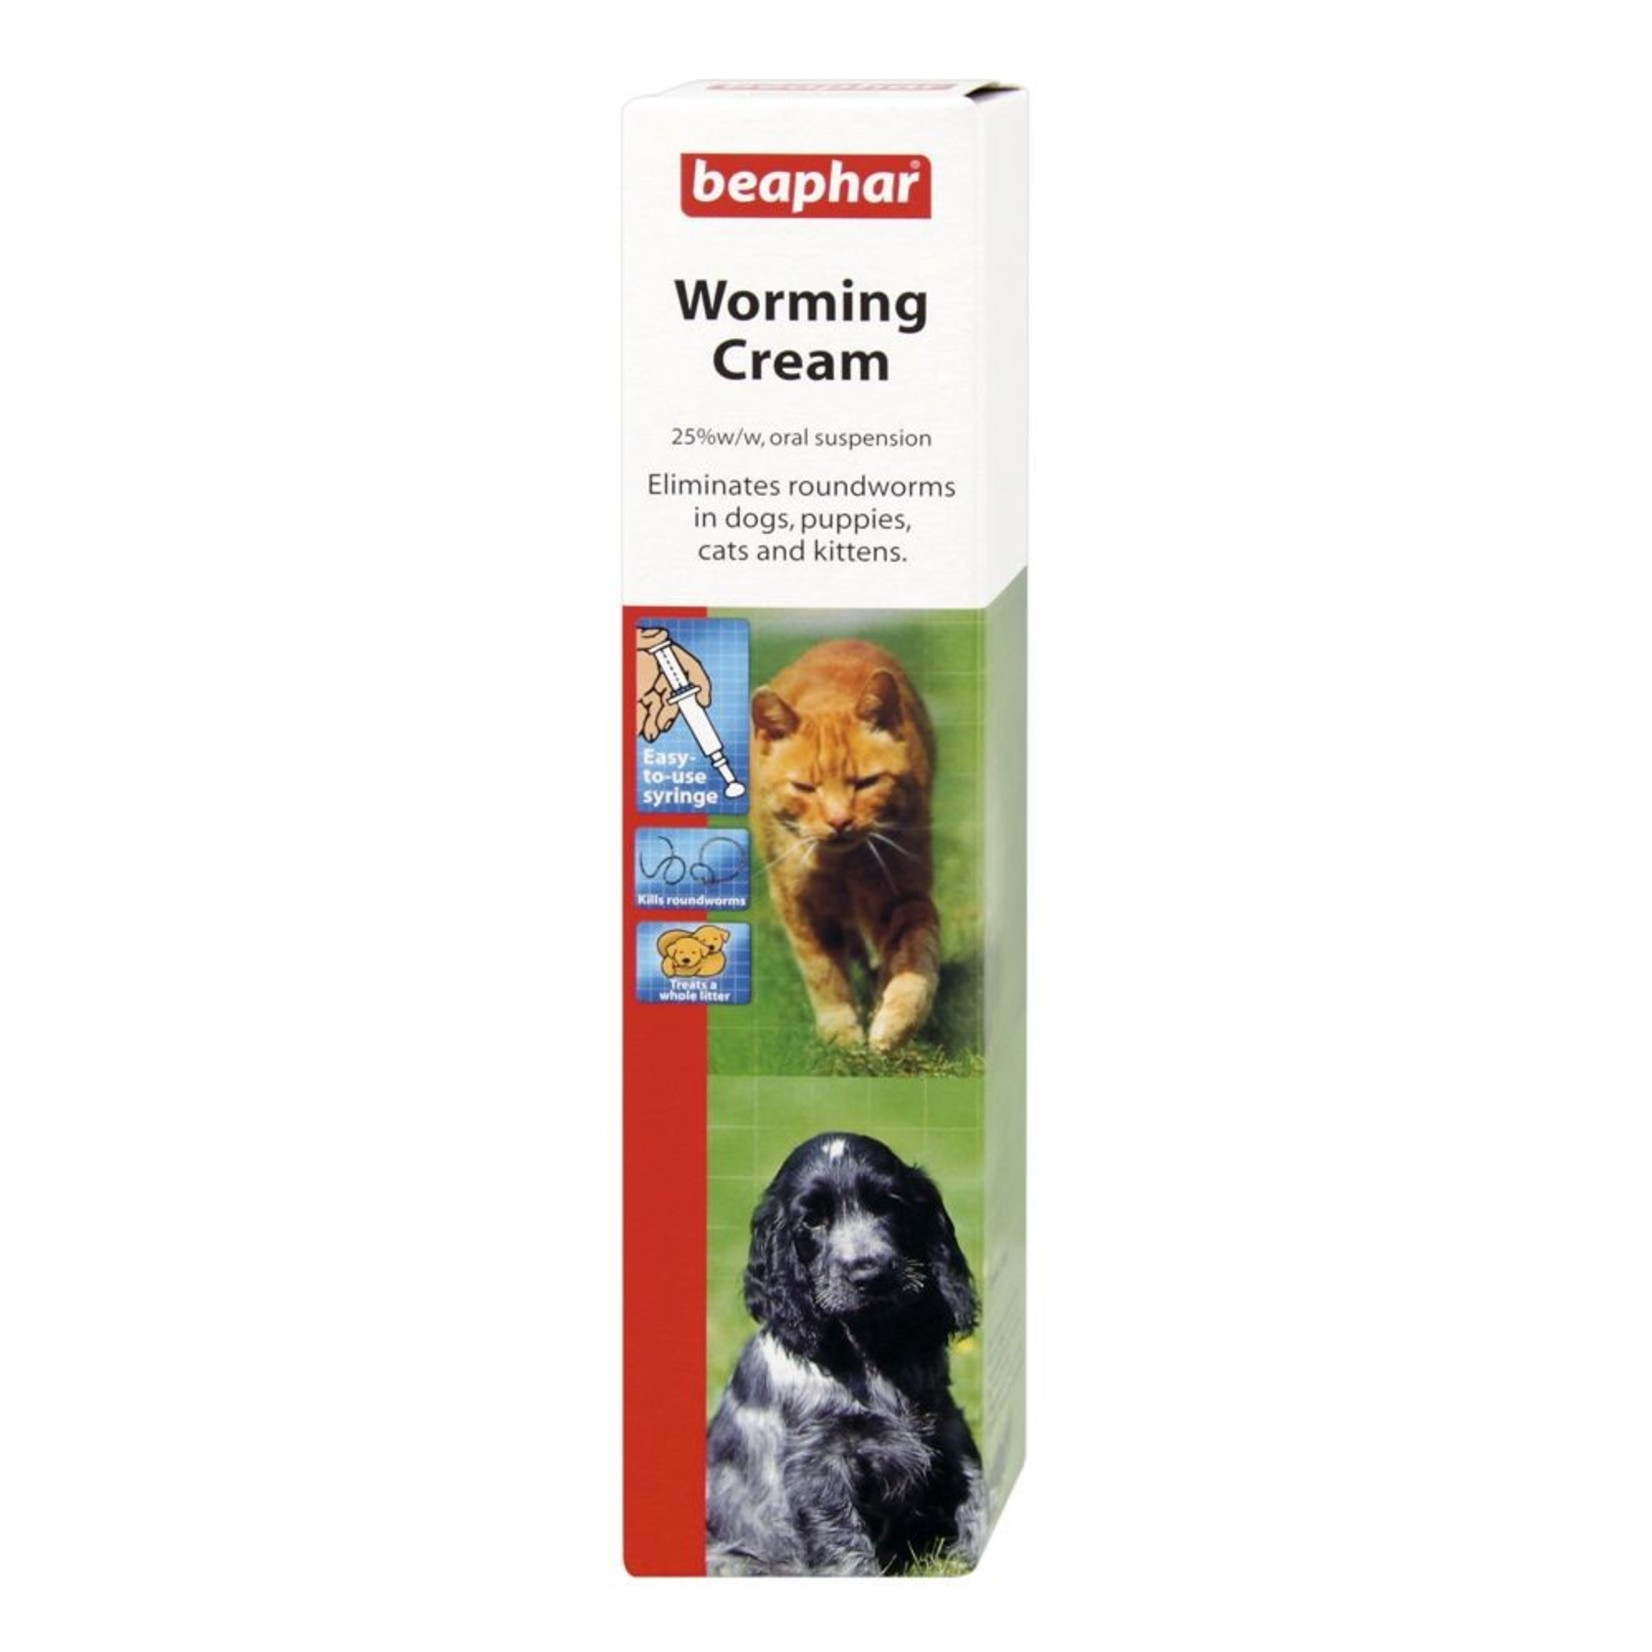 Beaphar Worming Cream for Dogs & Cats, 18g